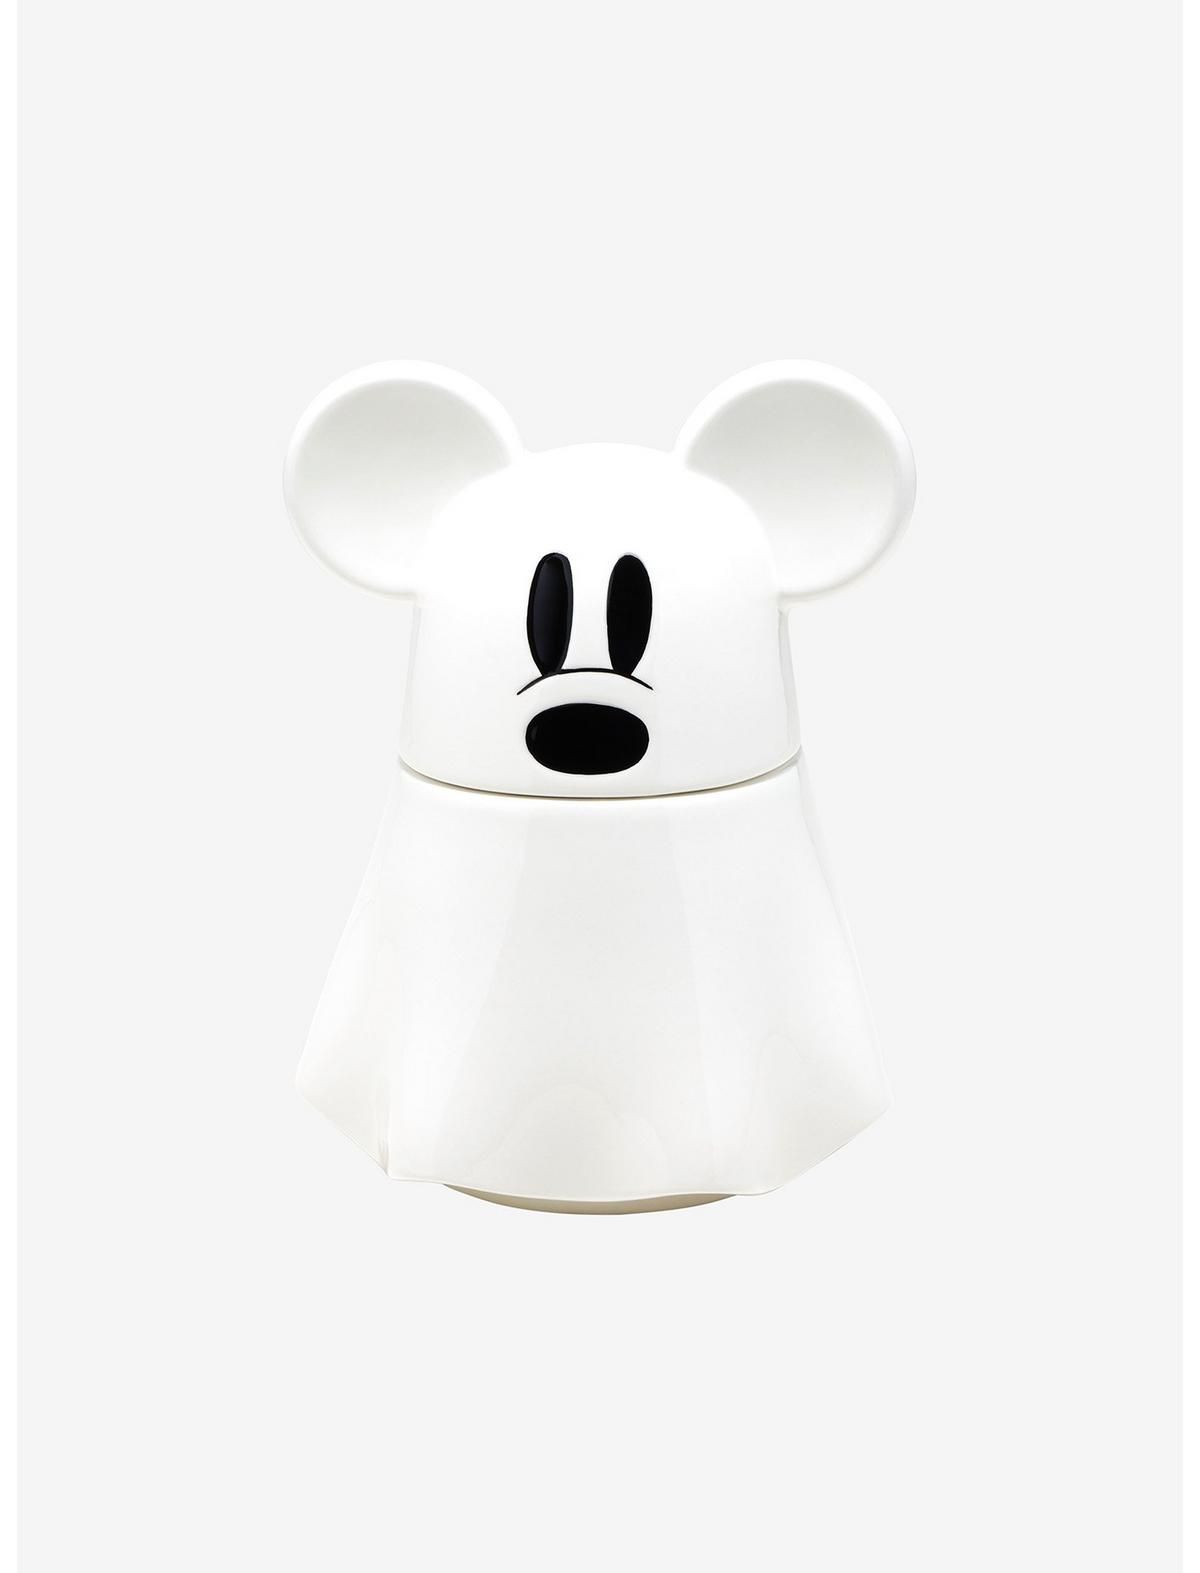 Disney Mickey Mouse Ghost Candy Bowl Hot Topic Exclusive | Hot Topic | Hot Topic